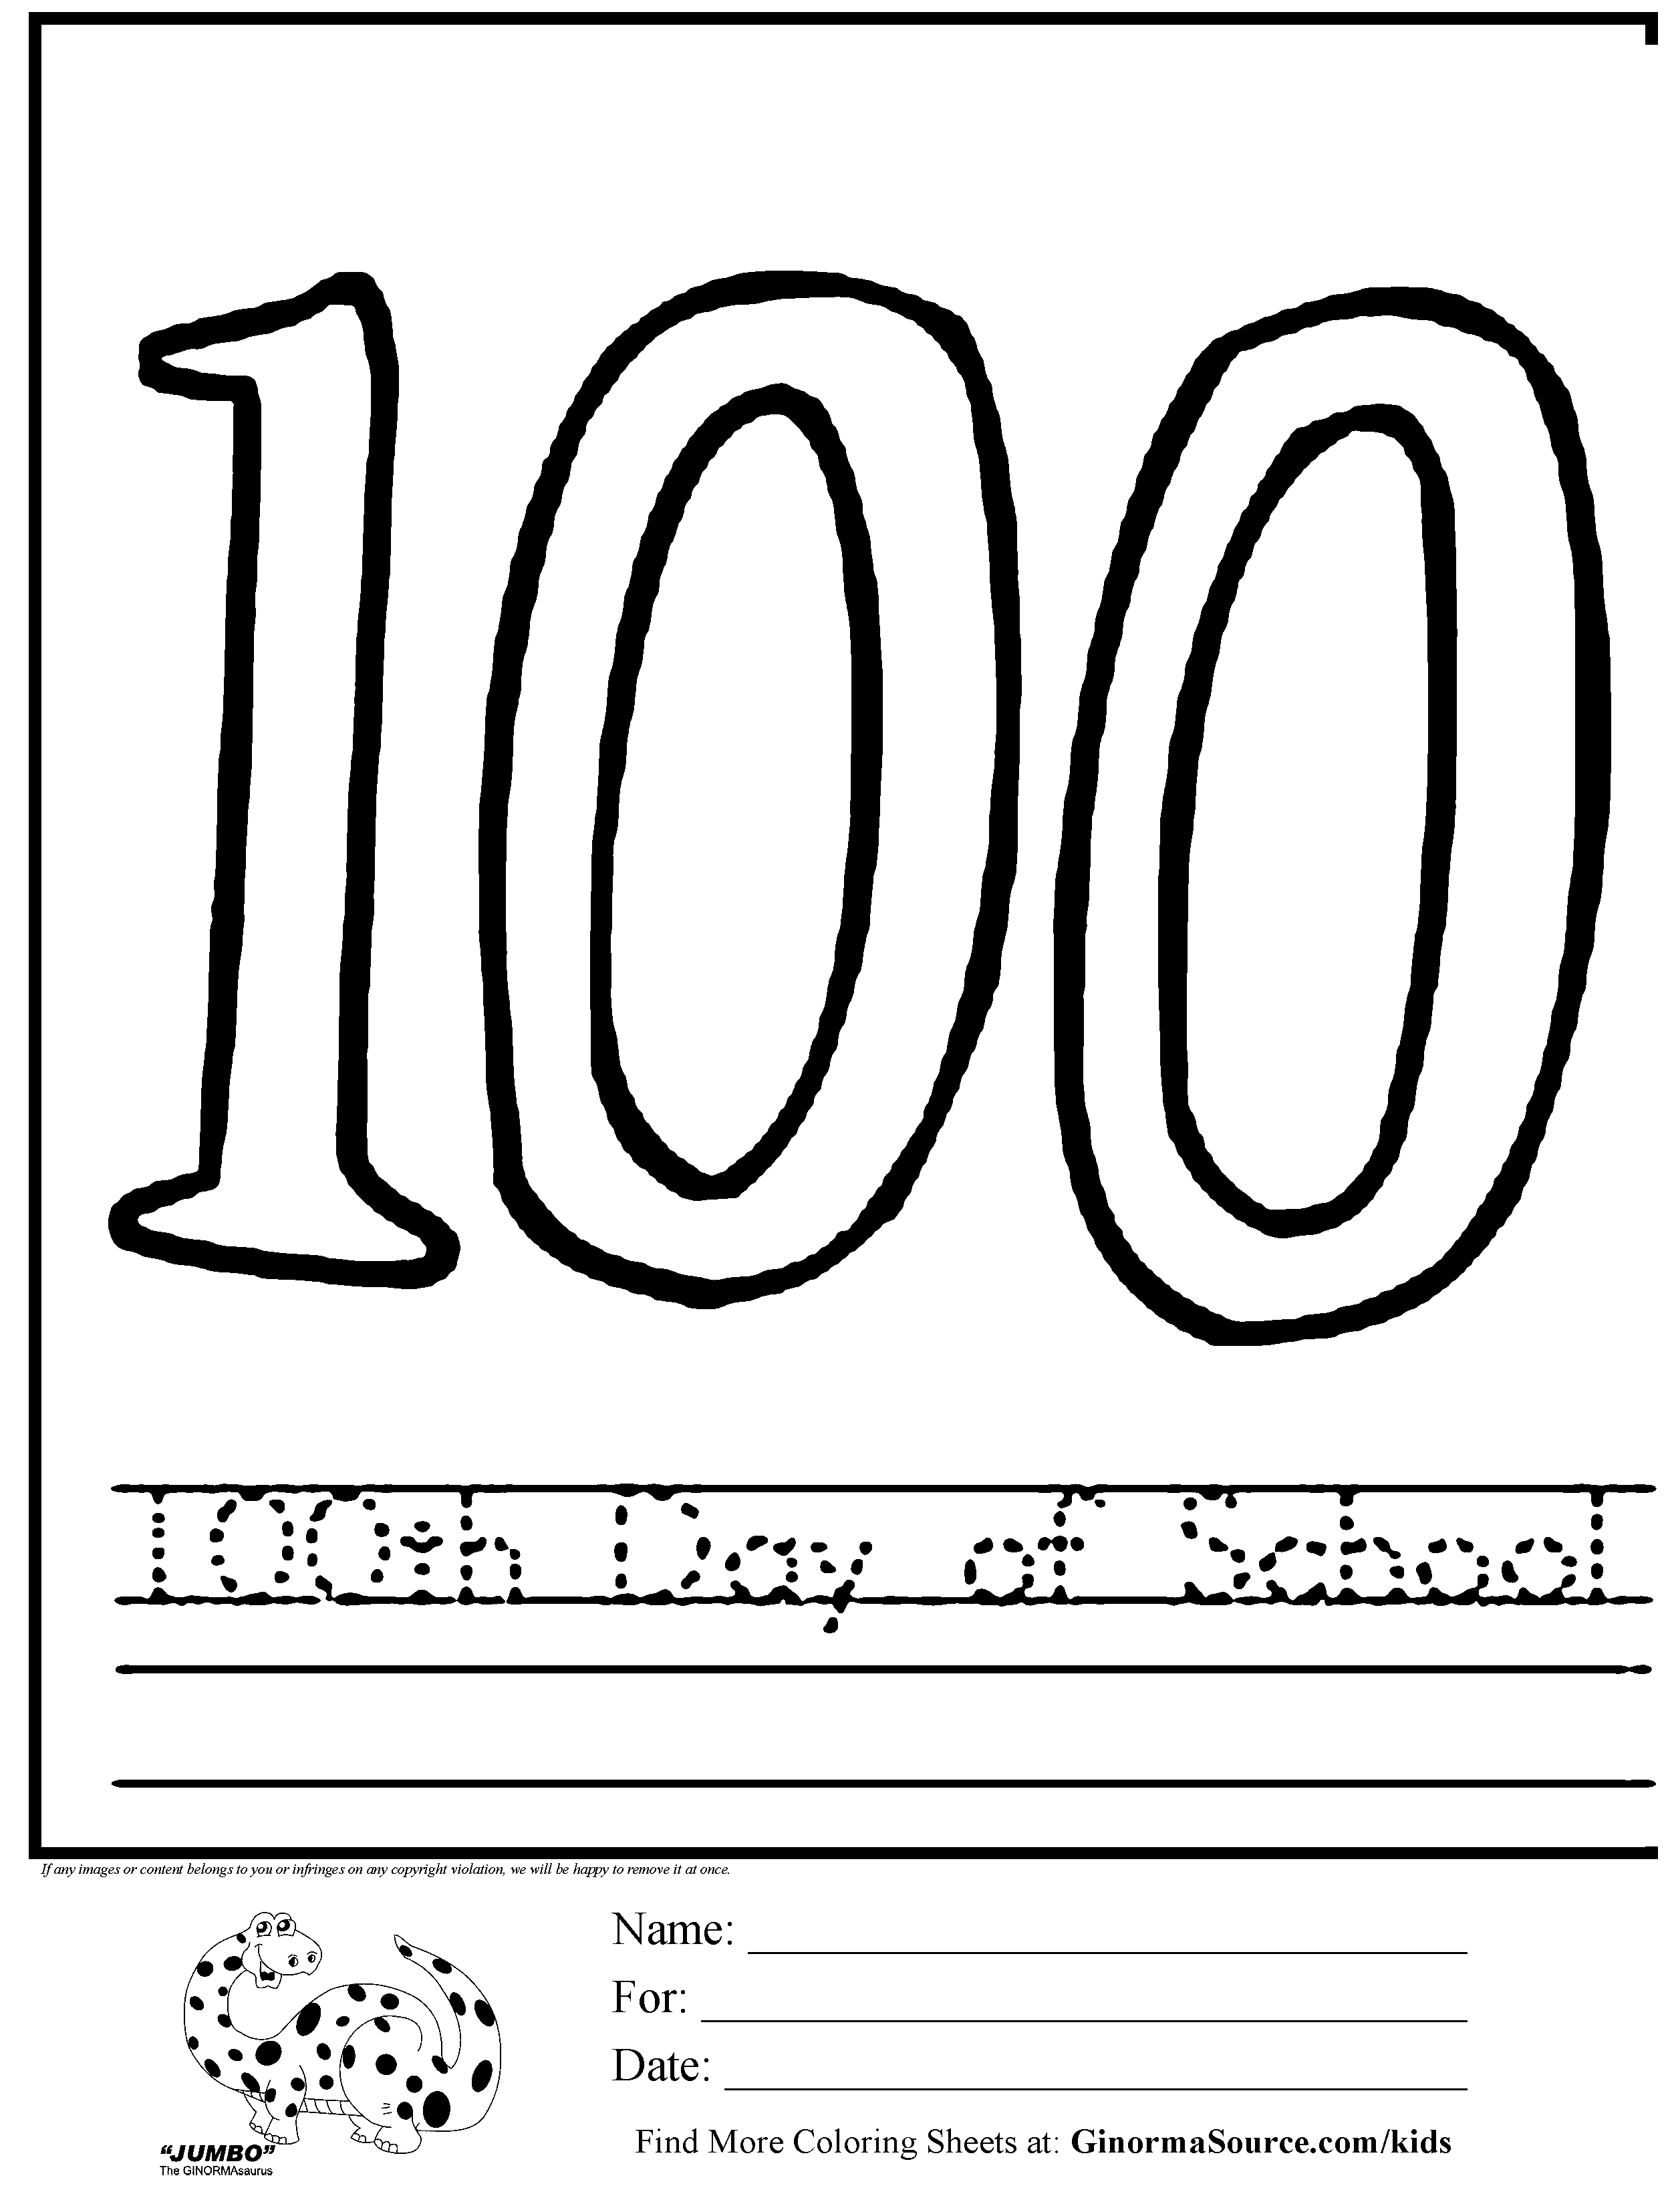 100th Day Of School Clipart Black And White 100th Day Of School